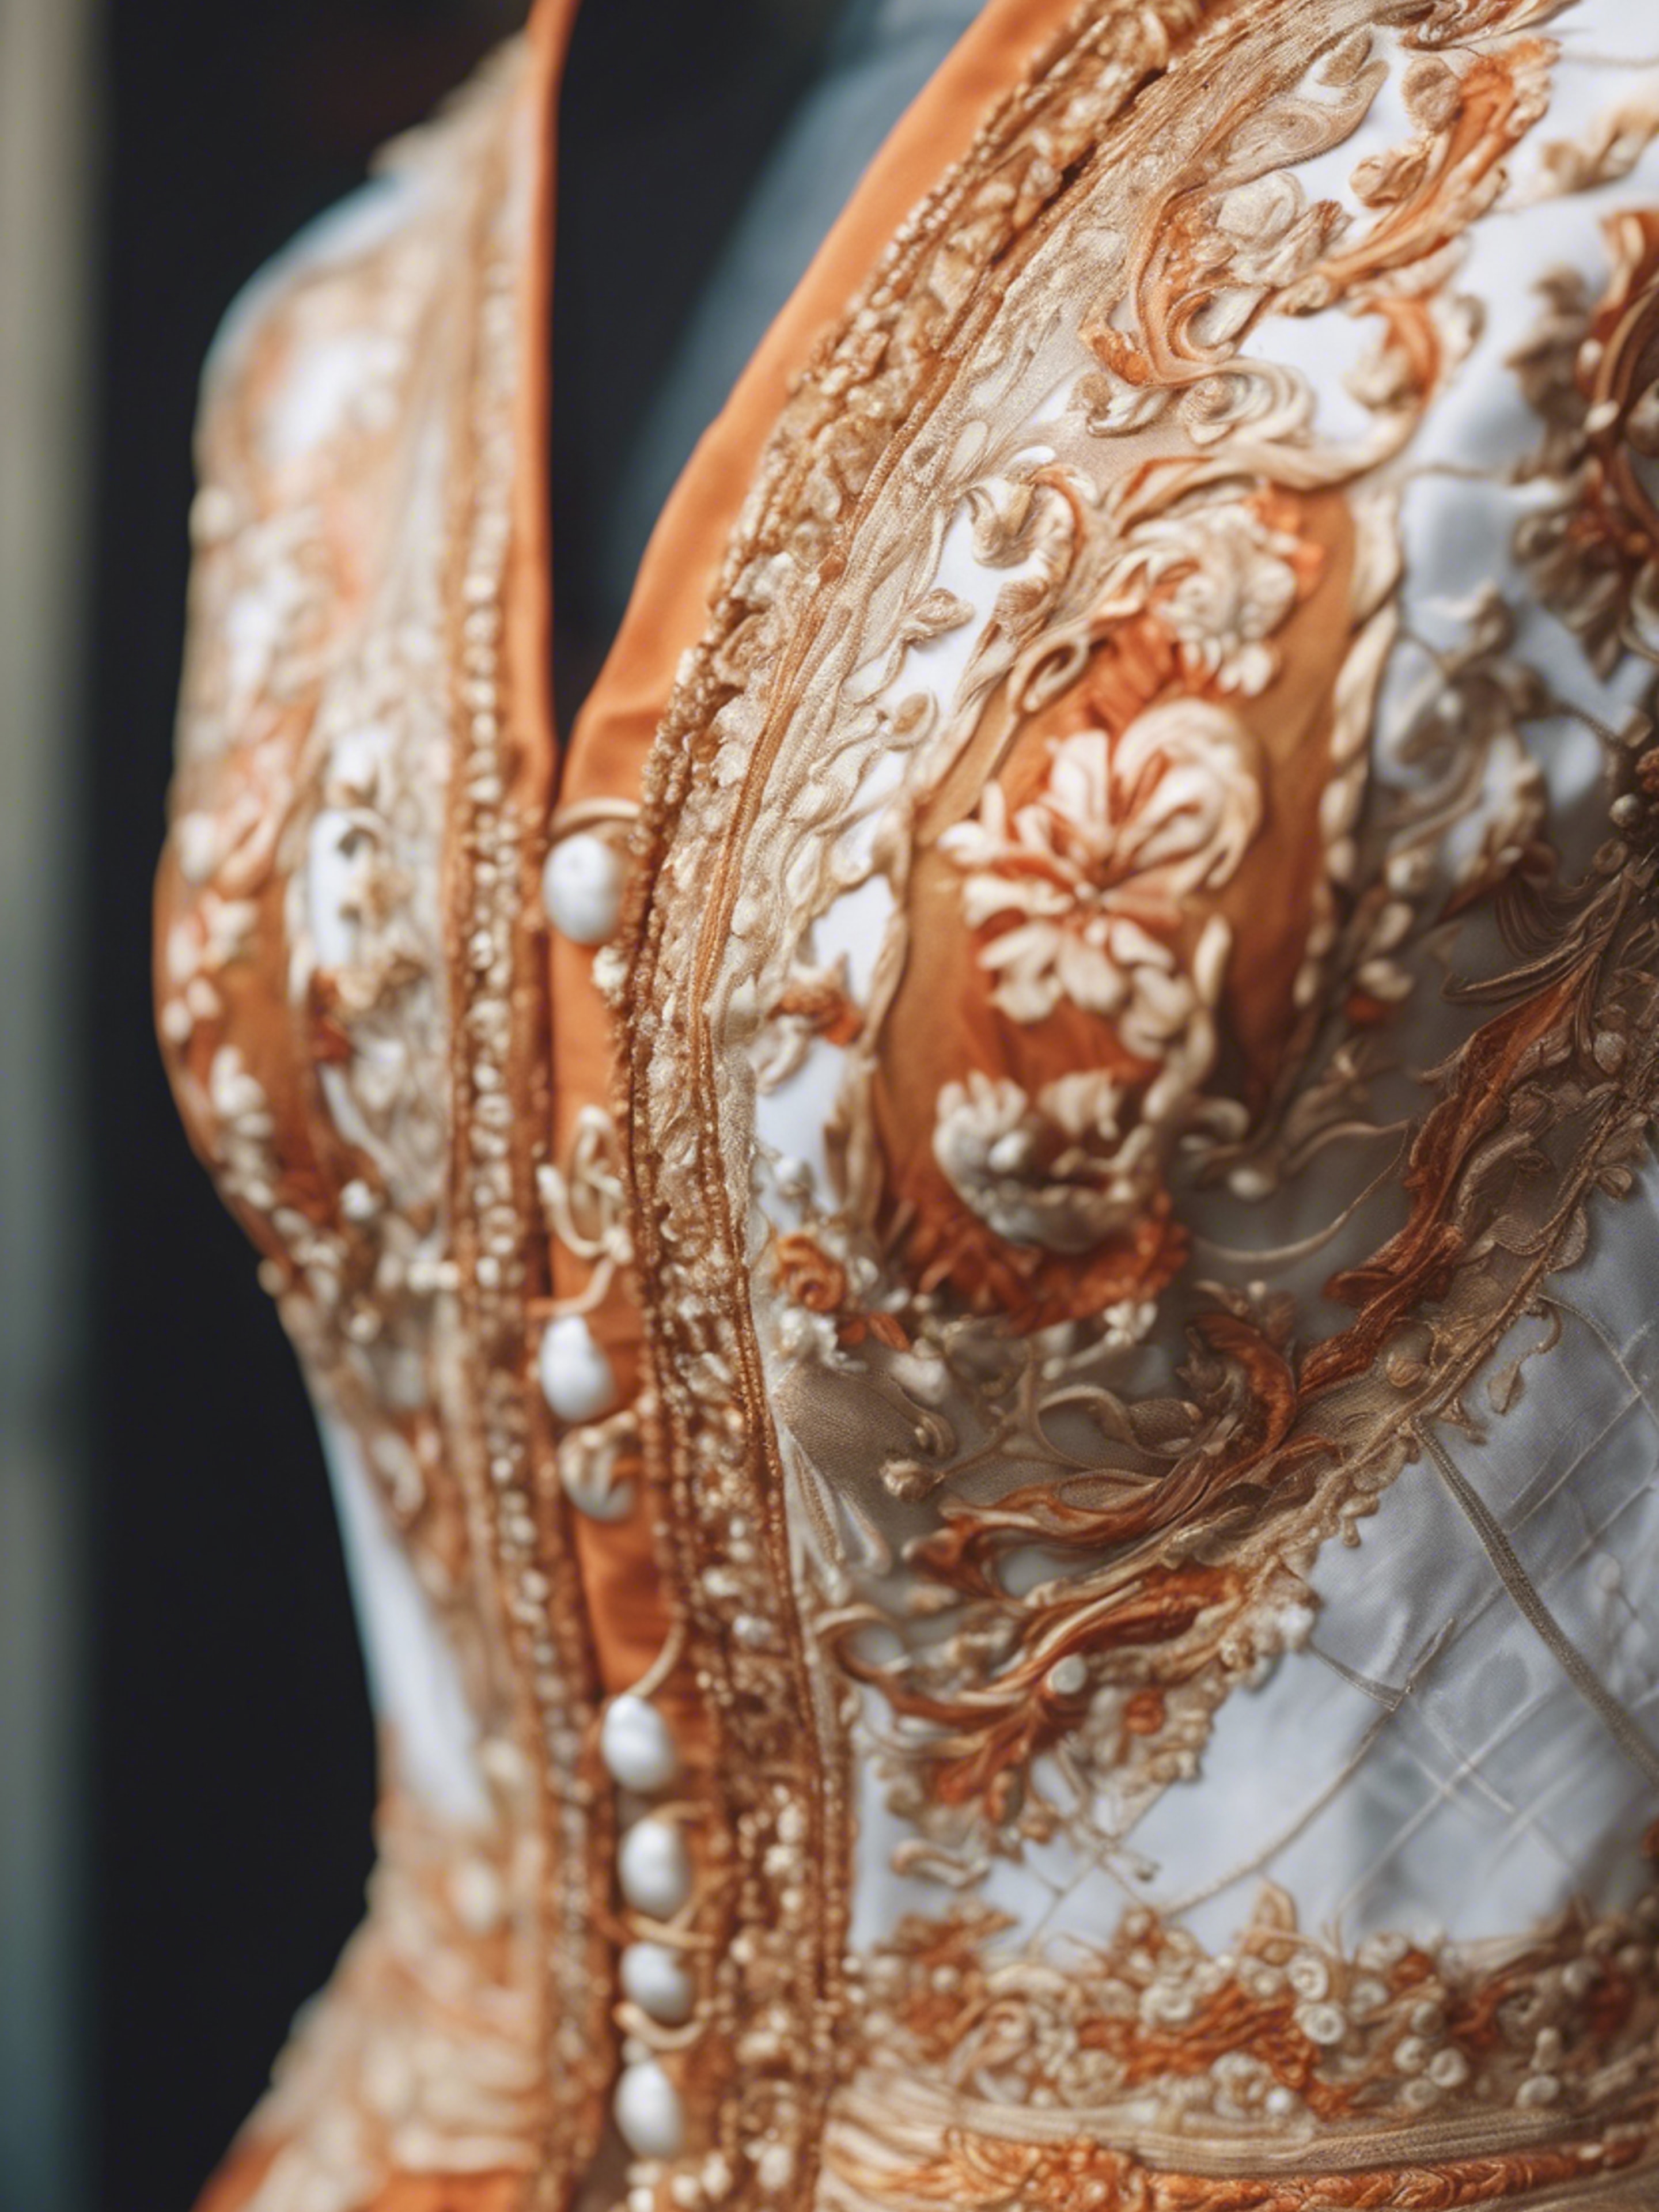 Detailed close up of a serene dress with swirling, baroque patterns in orange and white壁紙[e6fb41c5f94546e68d98]